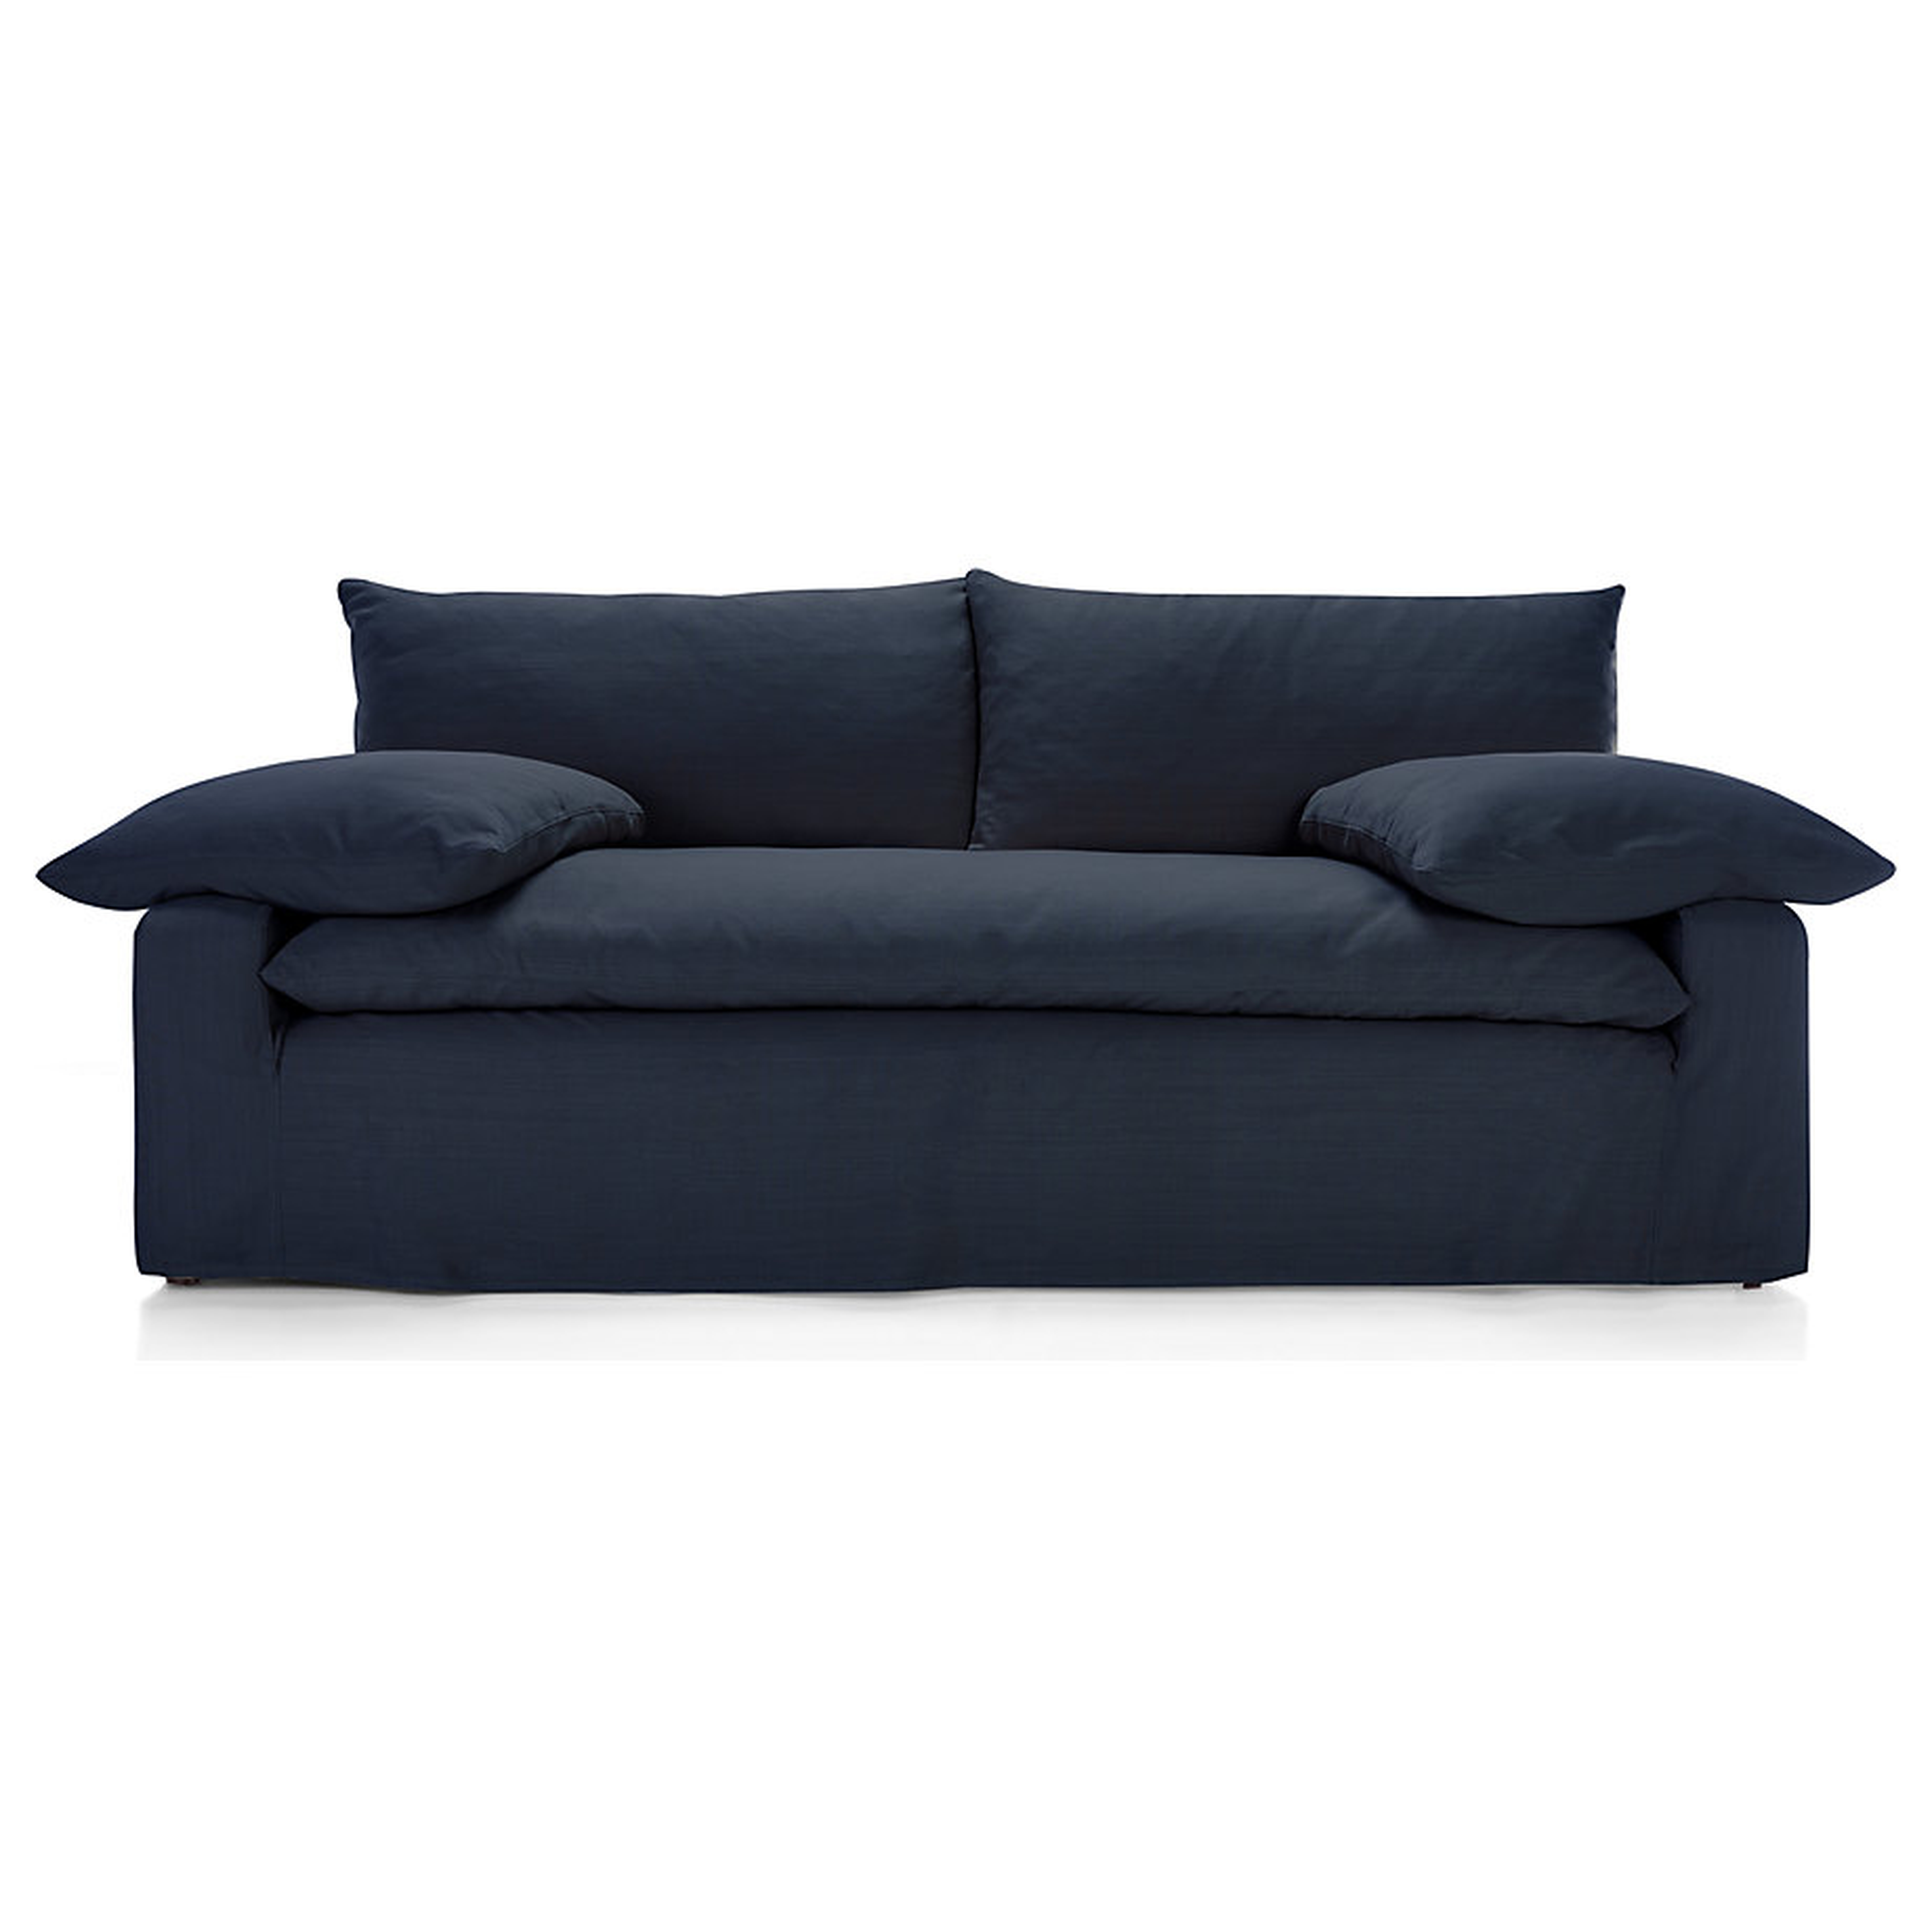 Ever Slipcovered Sofa - Crate and Barrel